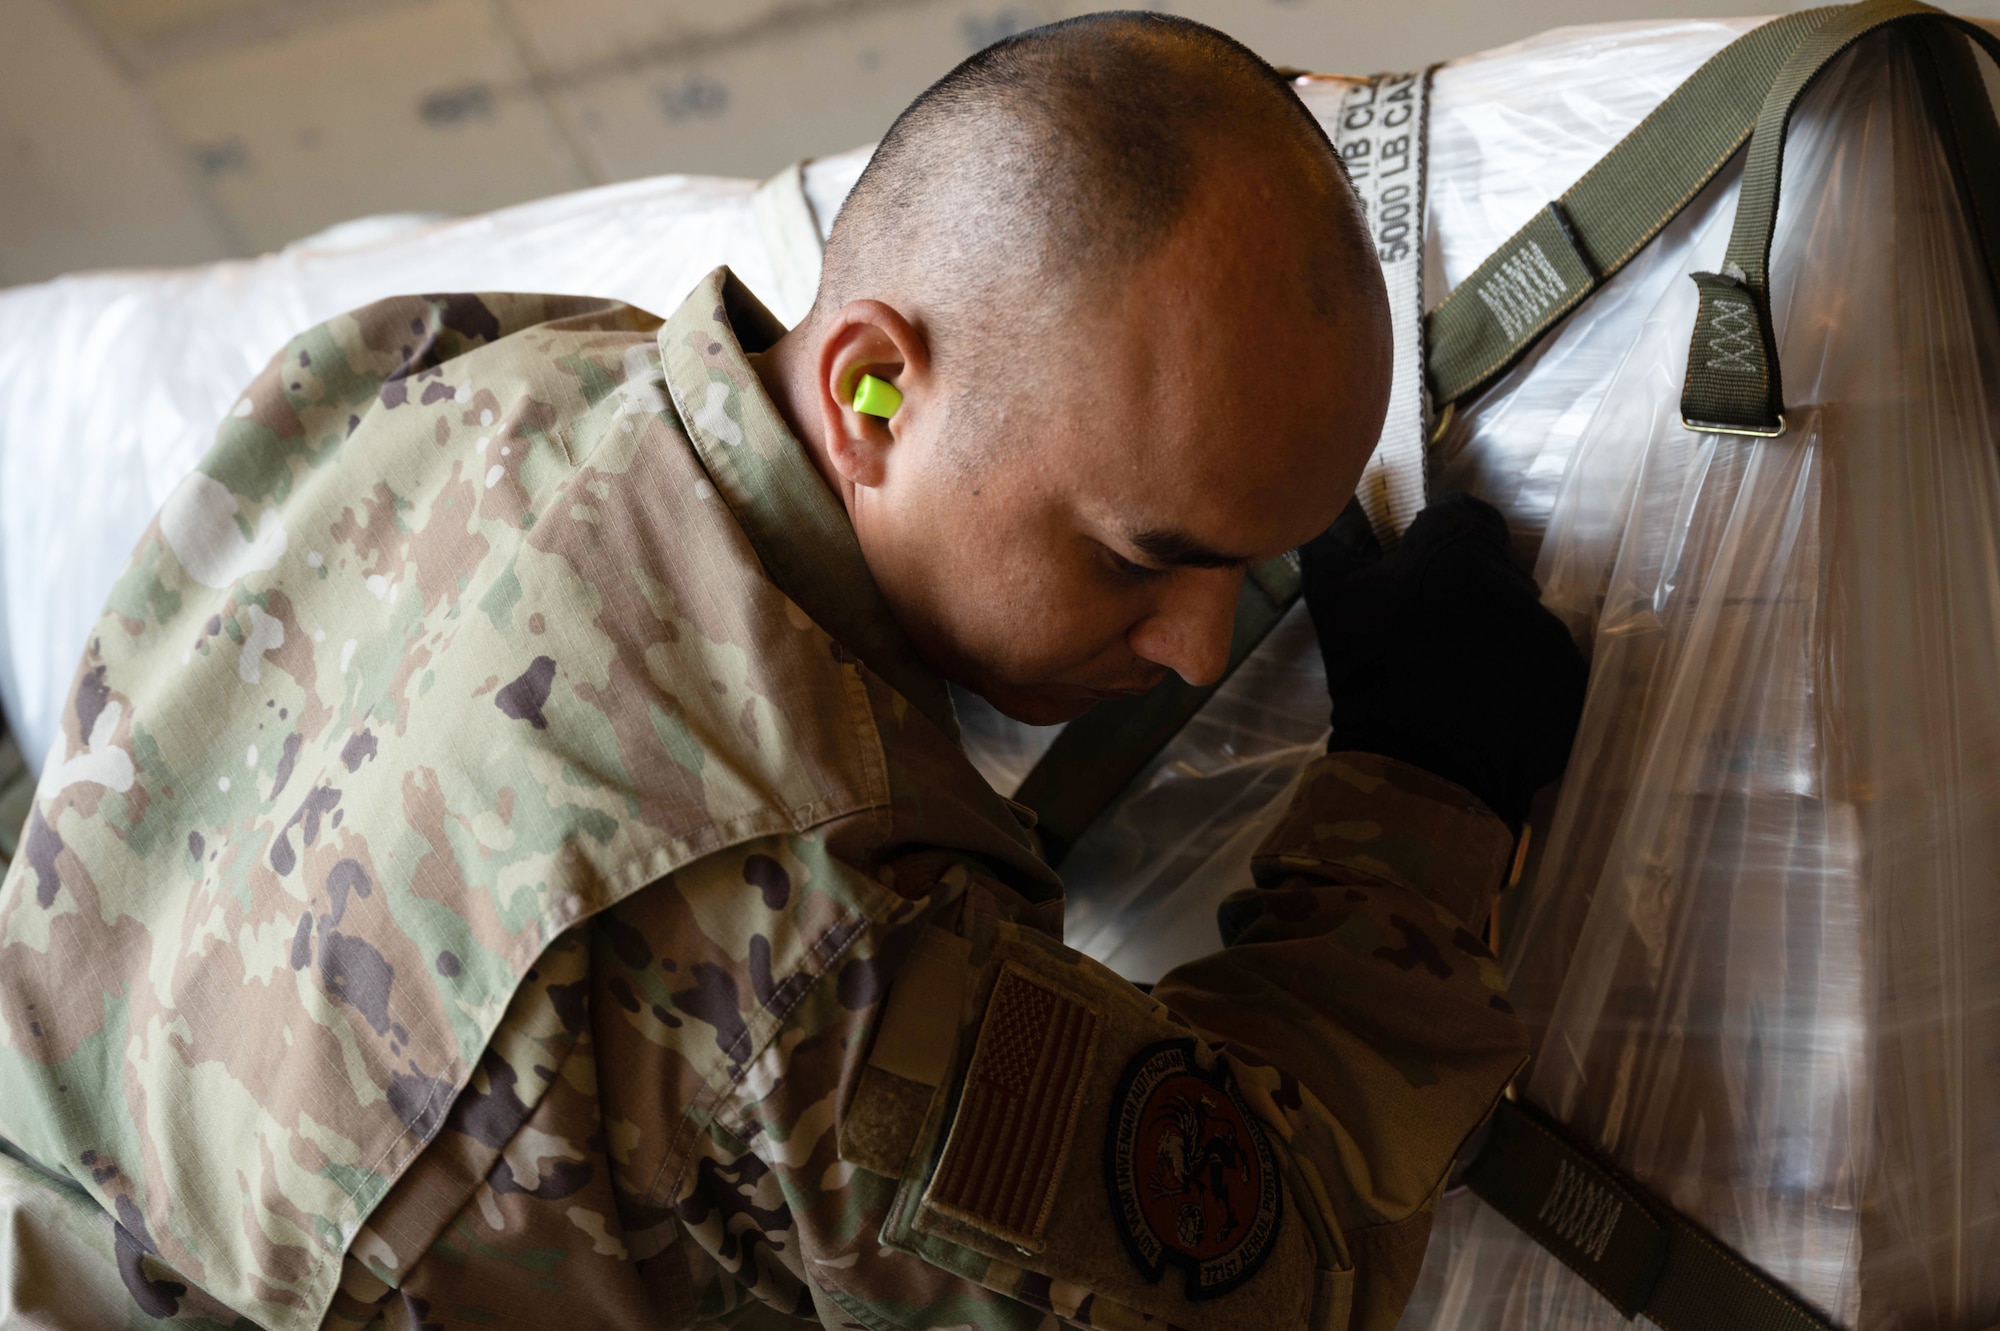 An Airman pushes a pallet of infant formula into a commercial aircraft.